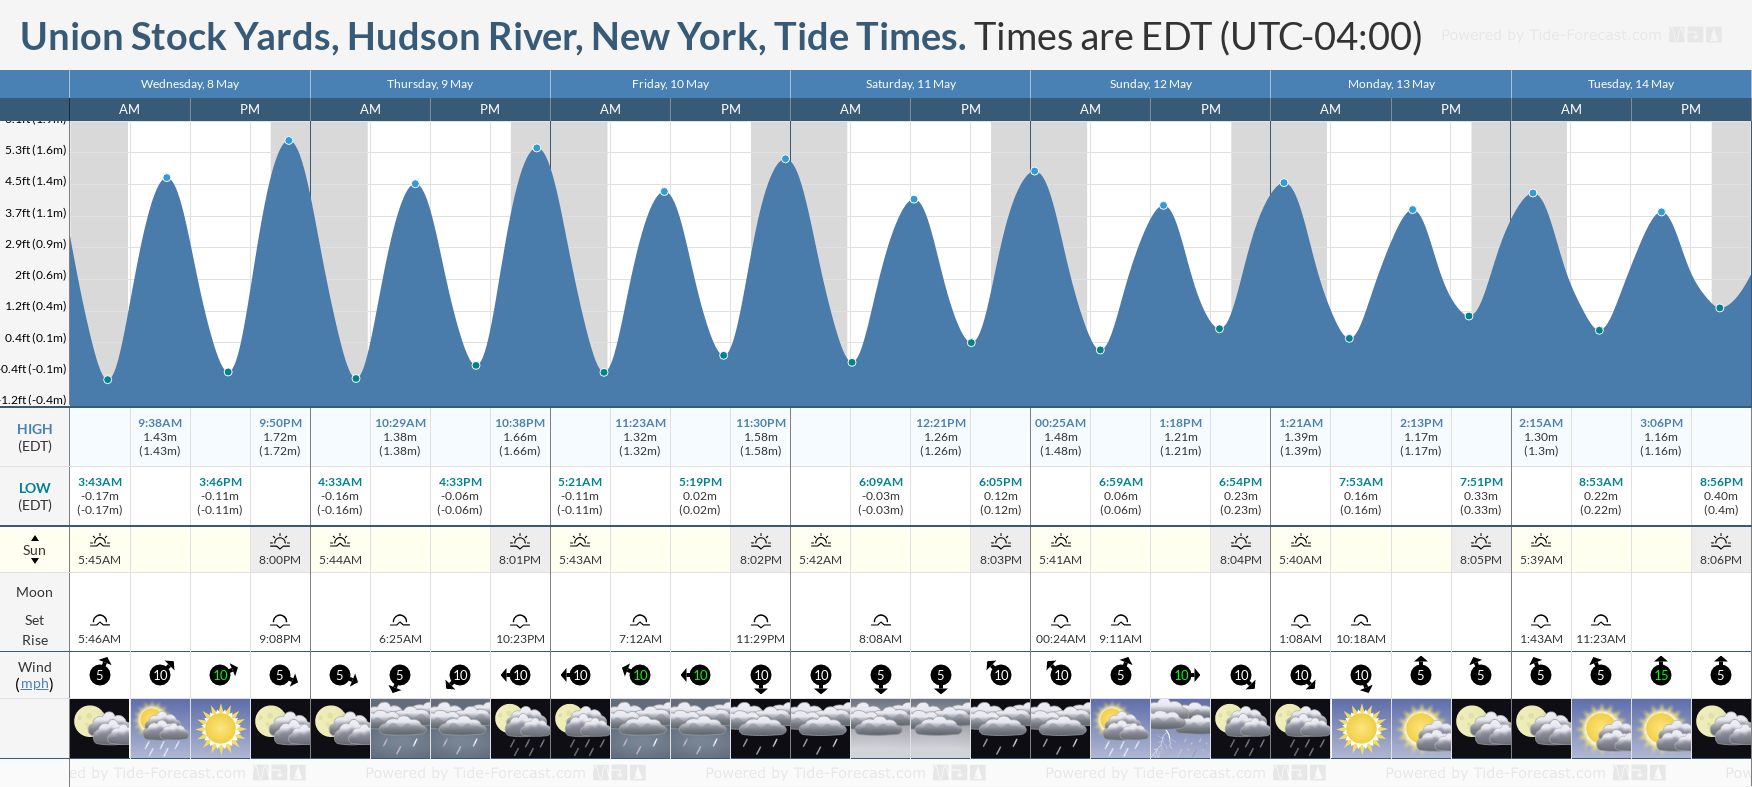 Union Stock Yards, Hudson River, New York Tide Chart including high and low tide tide times for the next 7 days